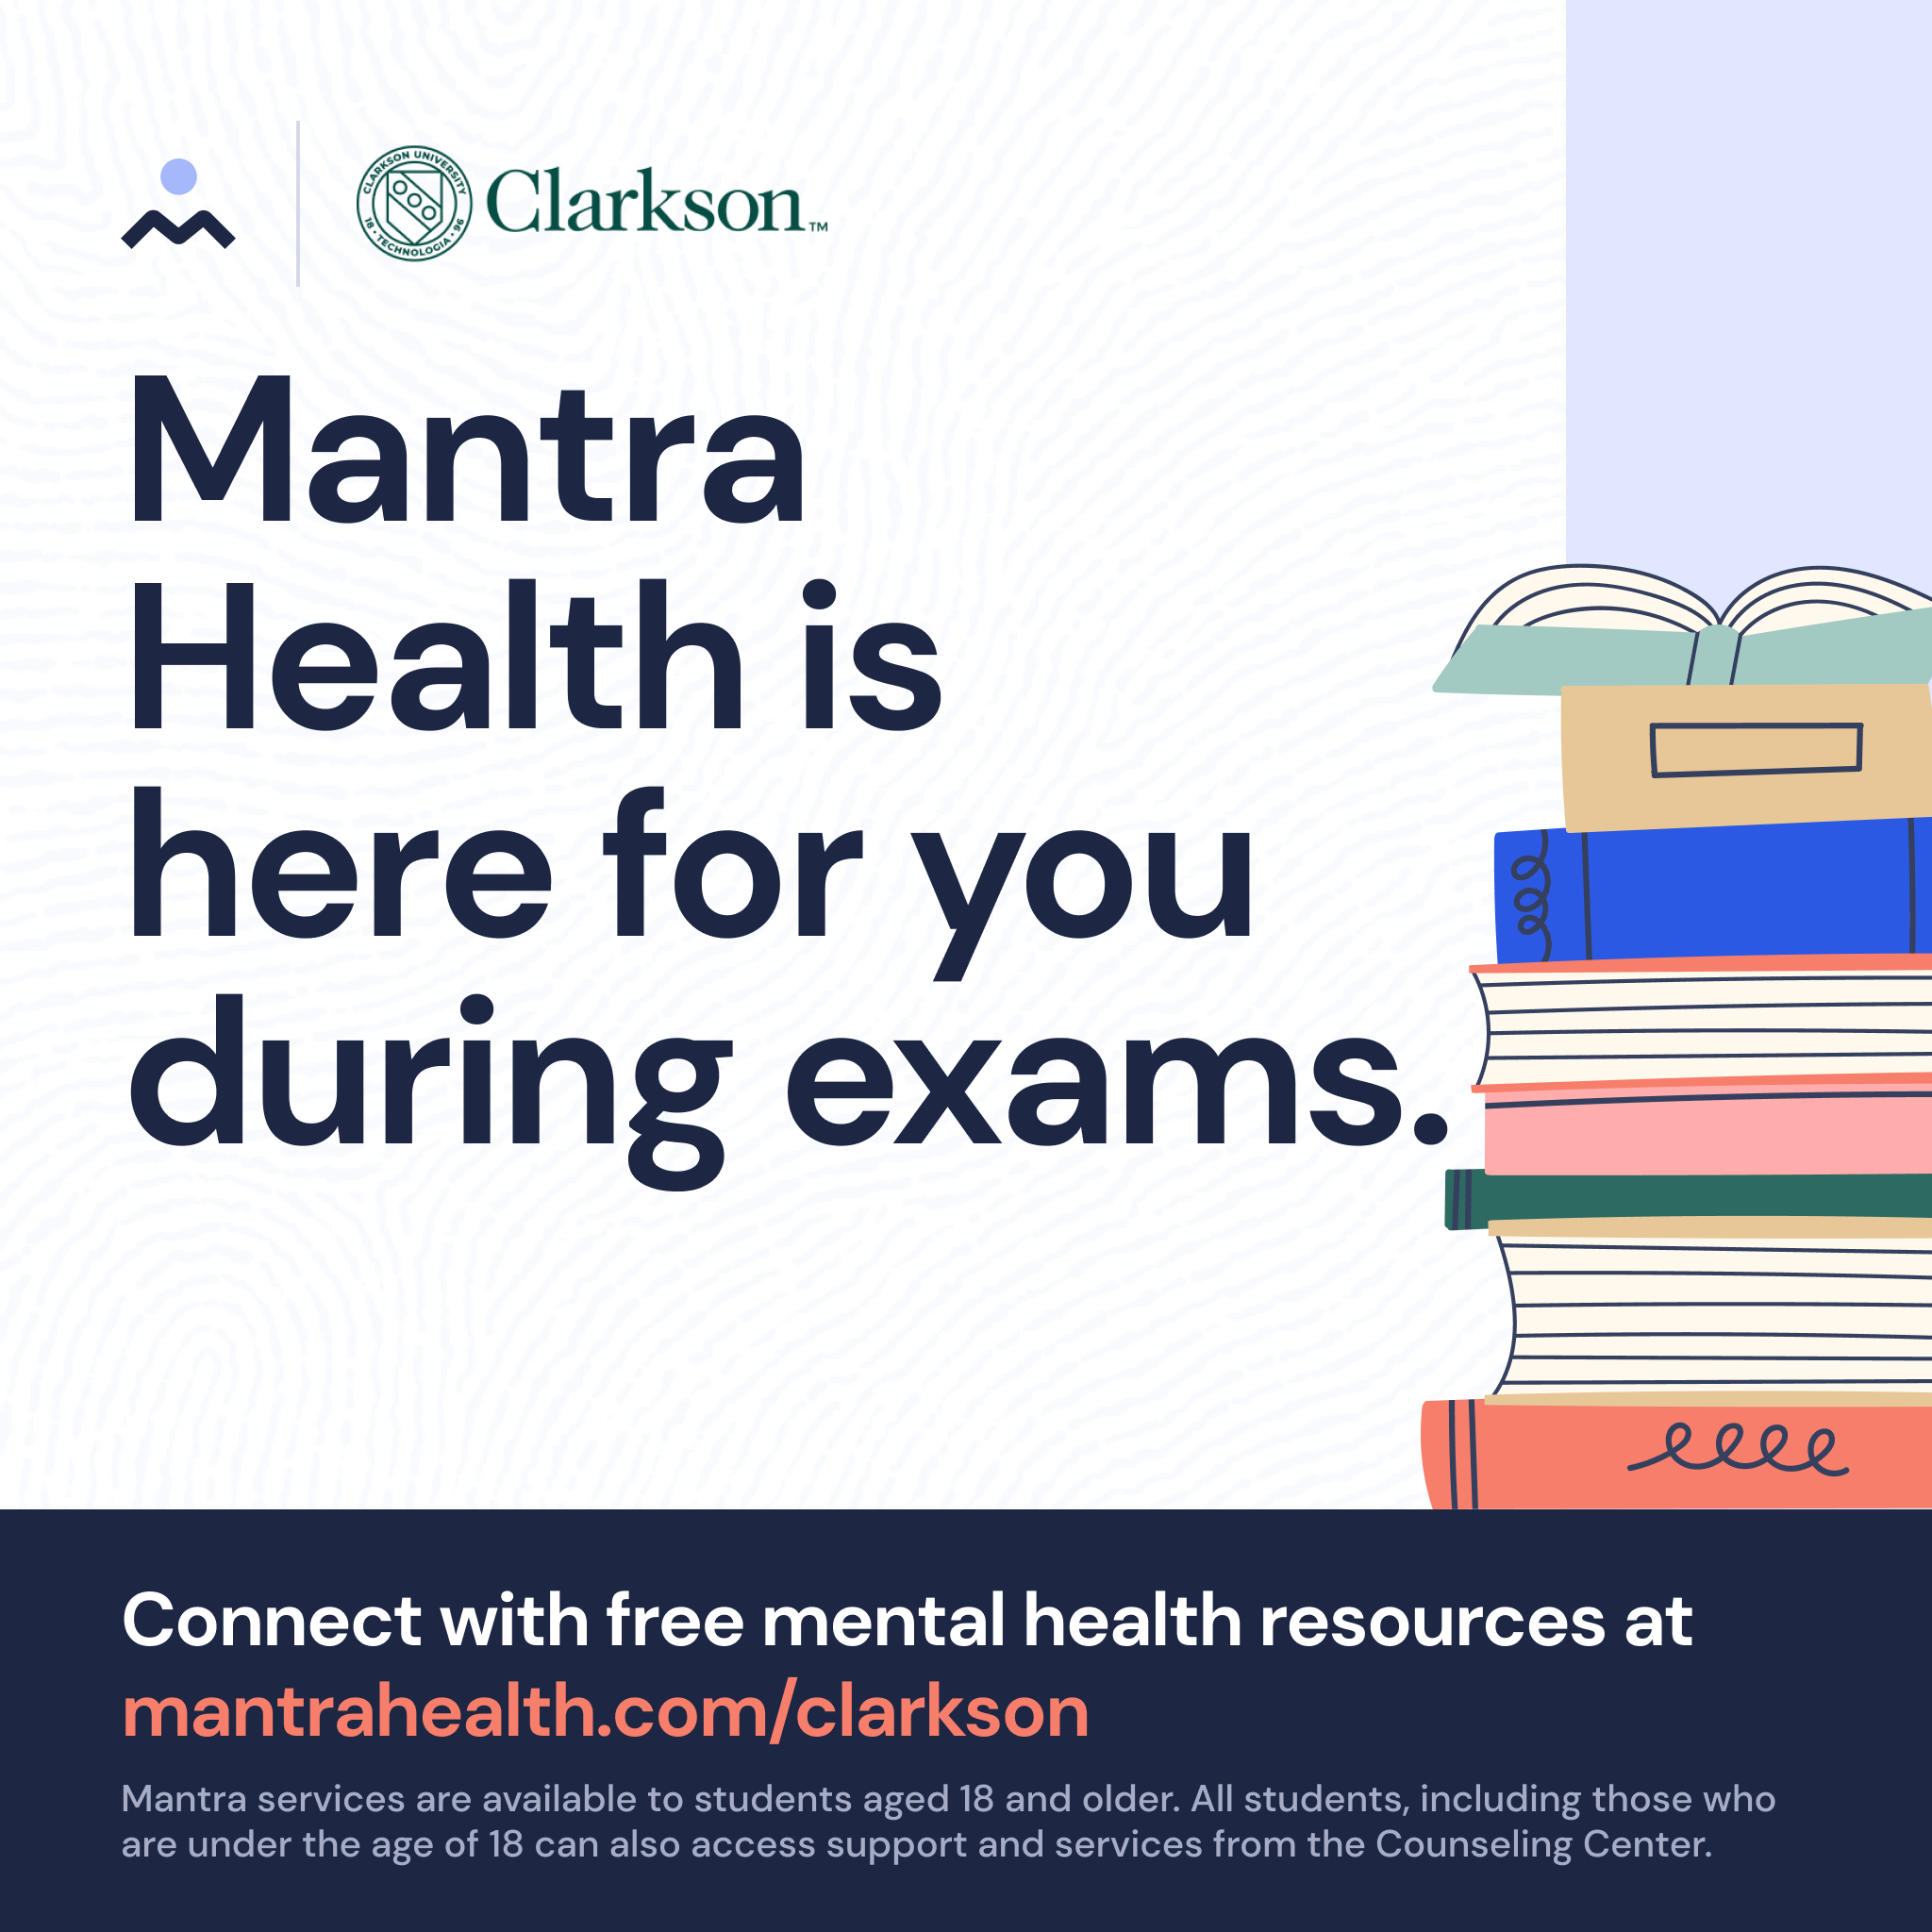 Mantra Health is here for you during exams